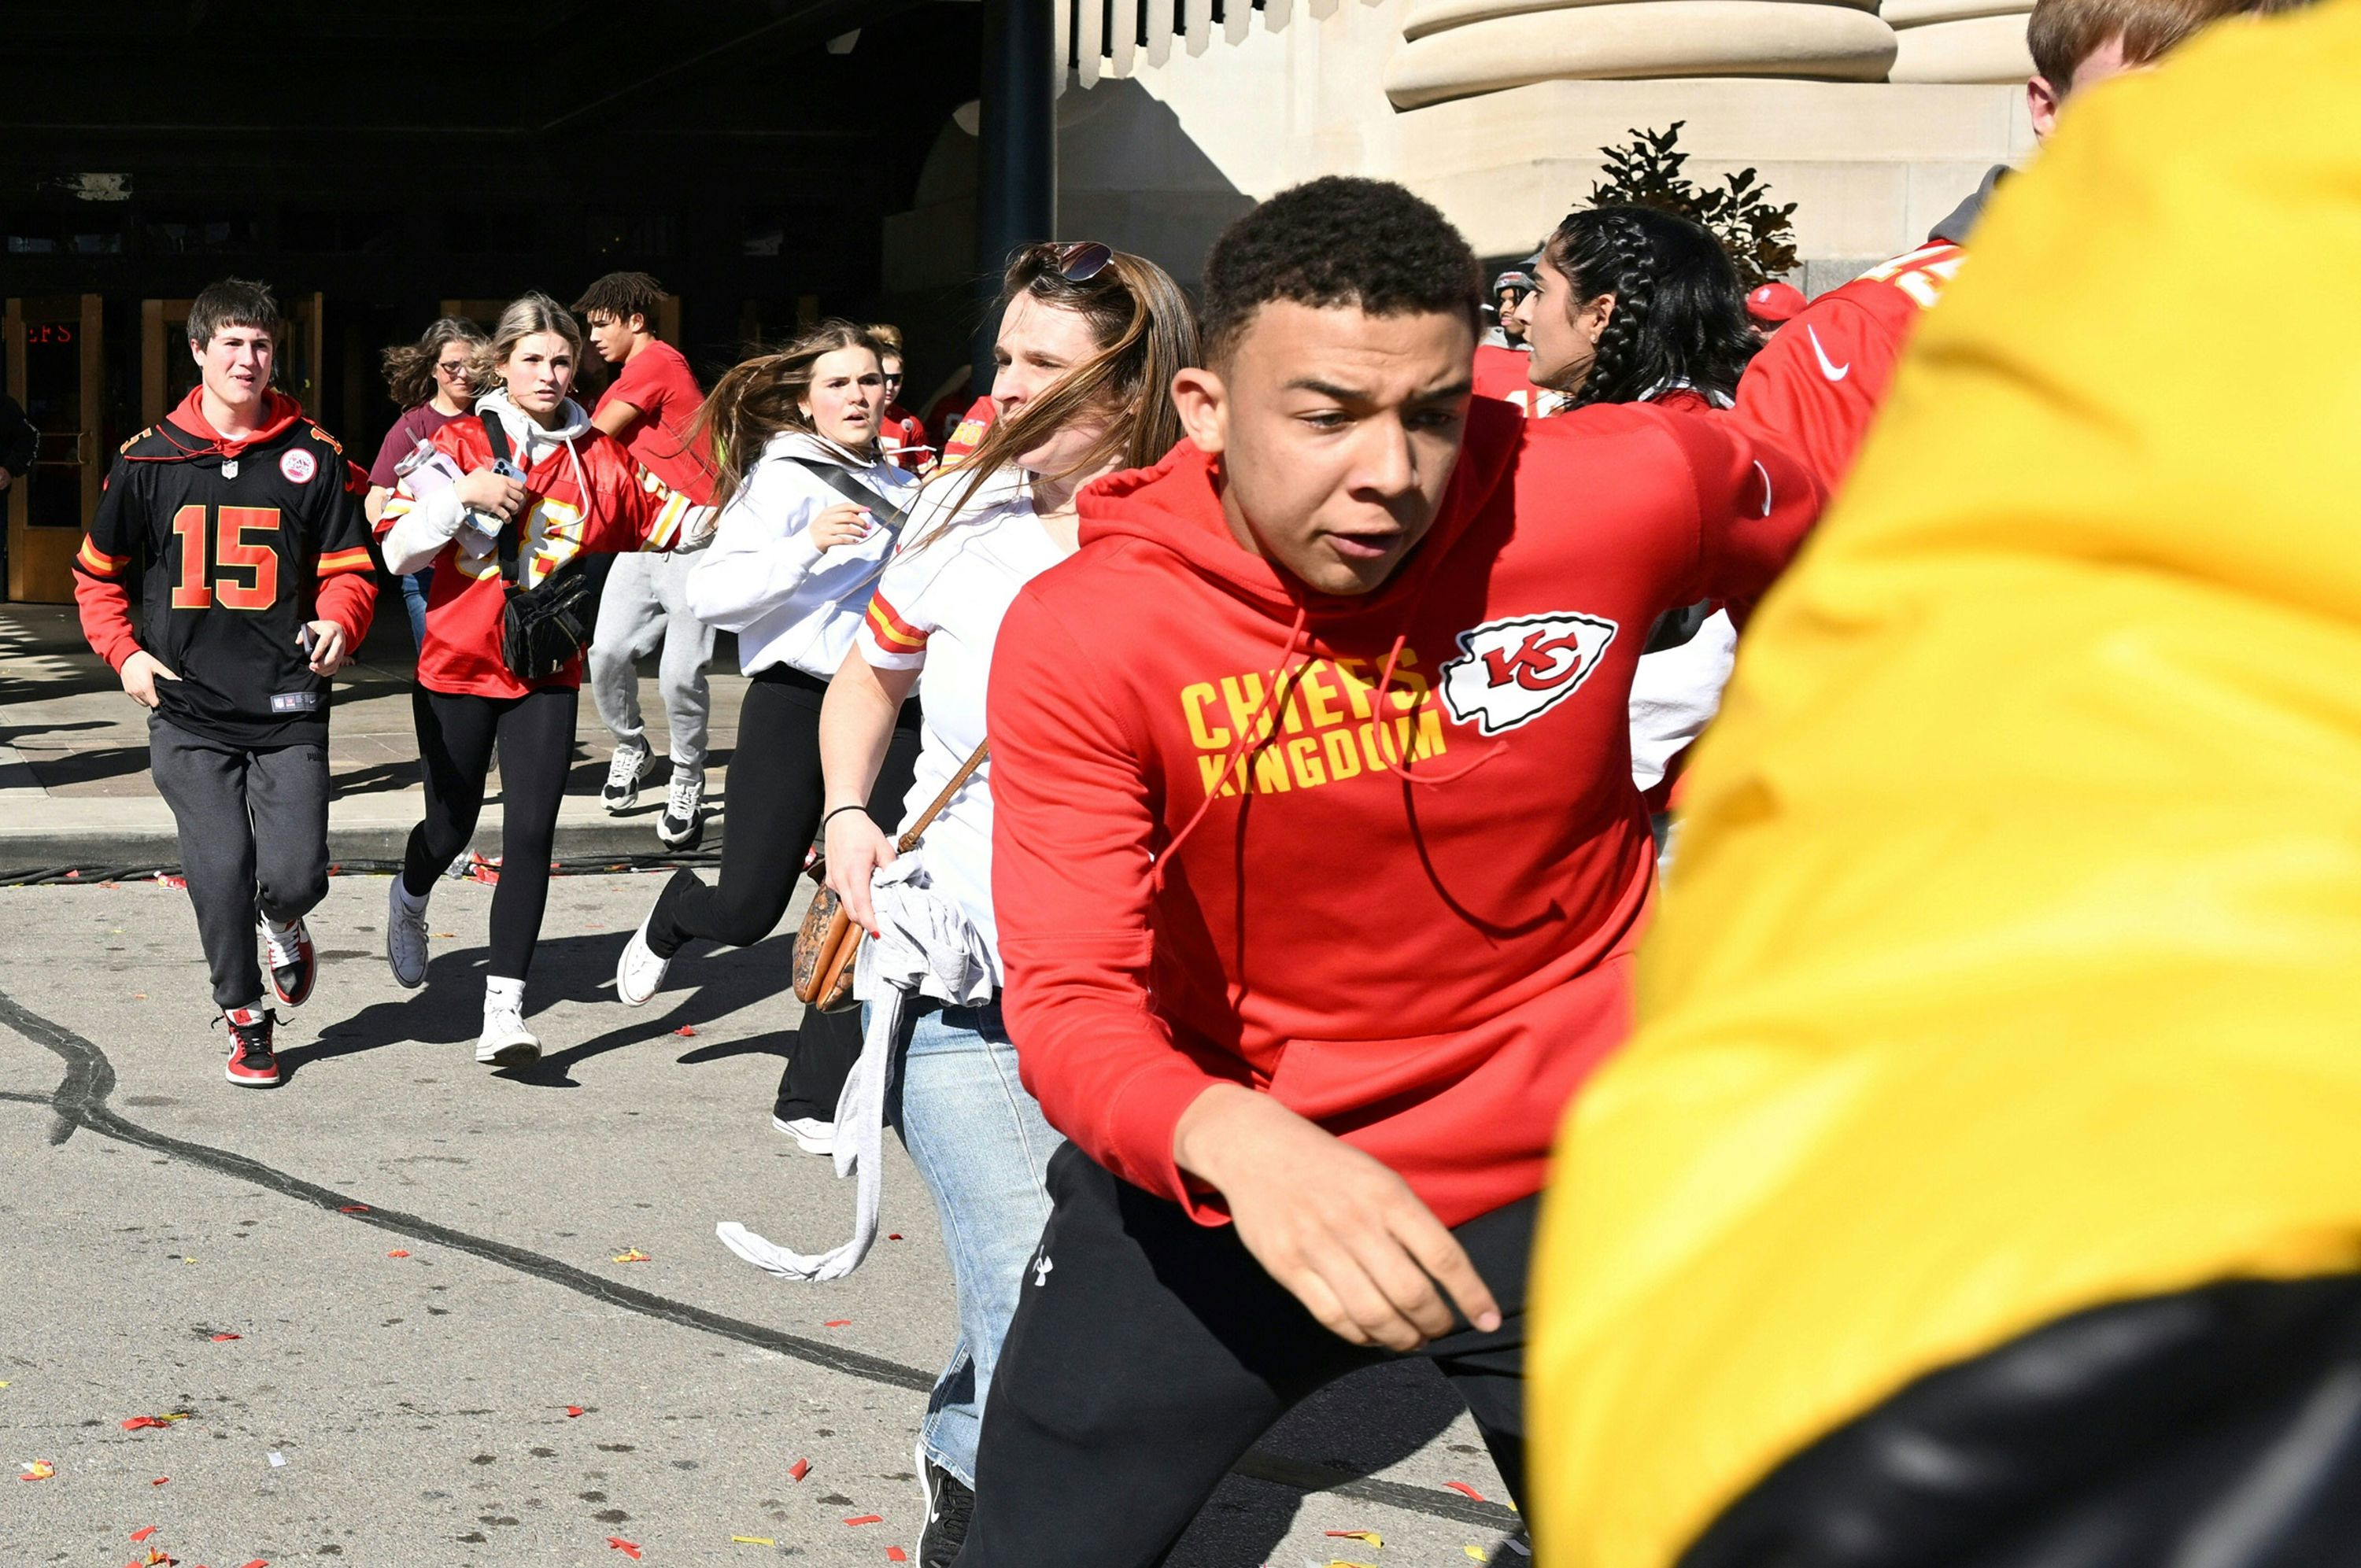 People flee after shots were fired near the area where a pep rally was held for the Kansas City Chiefs on Wednesday, February 14.